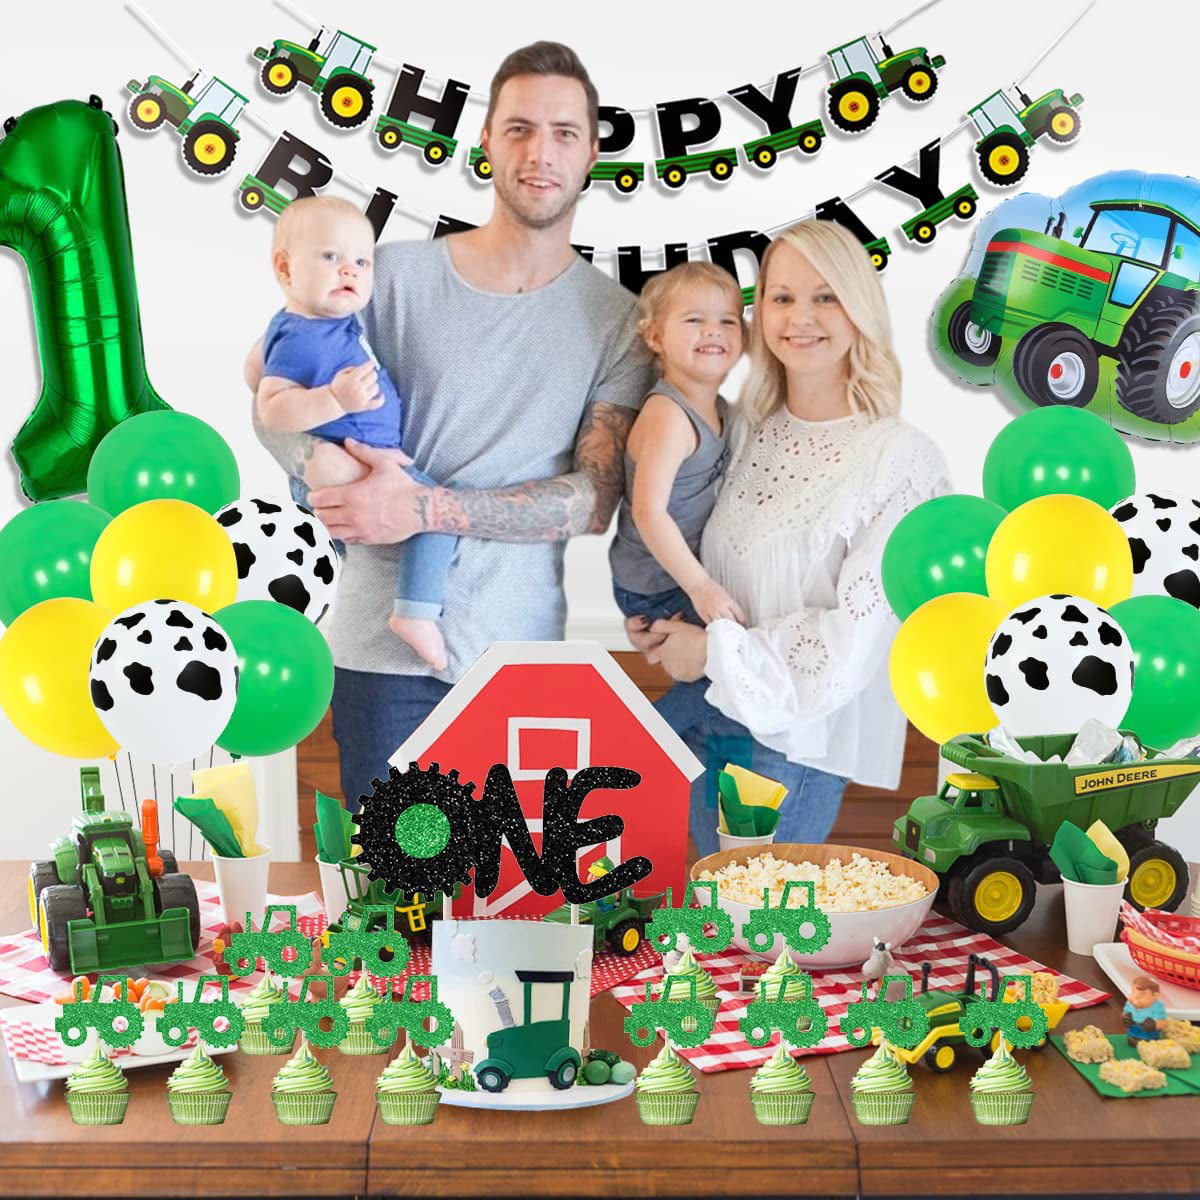 John Deere Tractor Birthday Party! Food, Games, Favors & More!